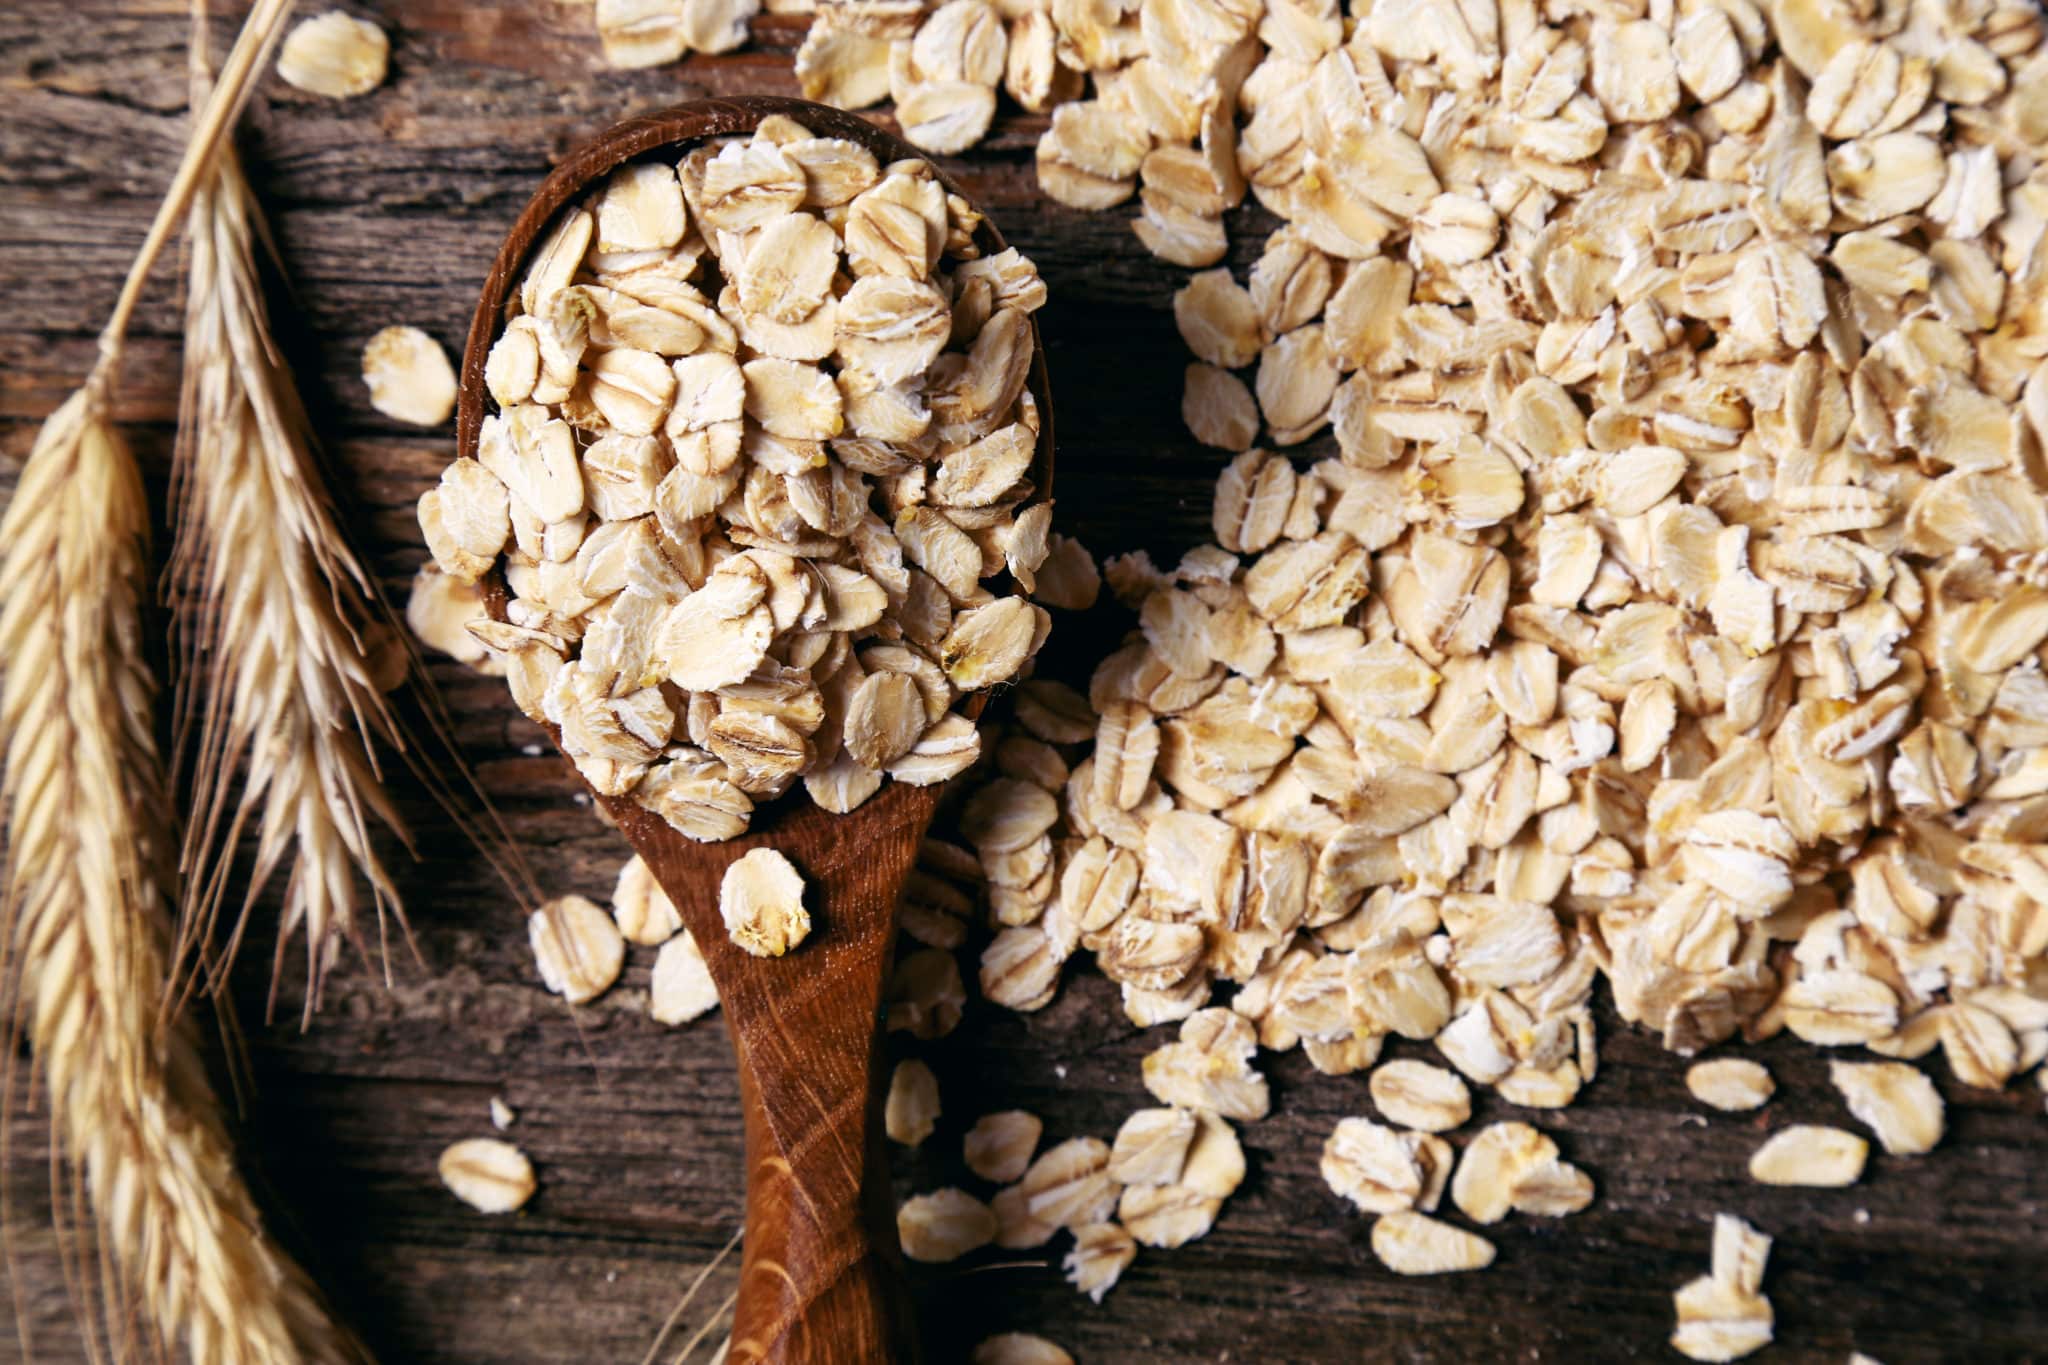 Try eating oats to lower your cholesterol naturally.